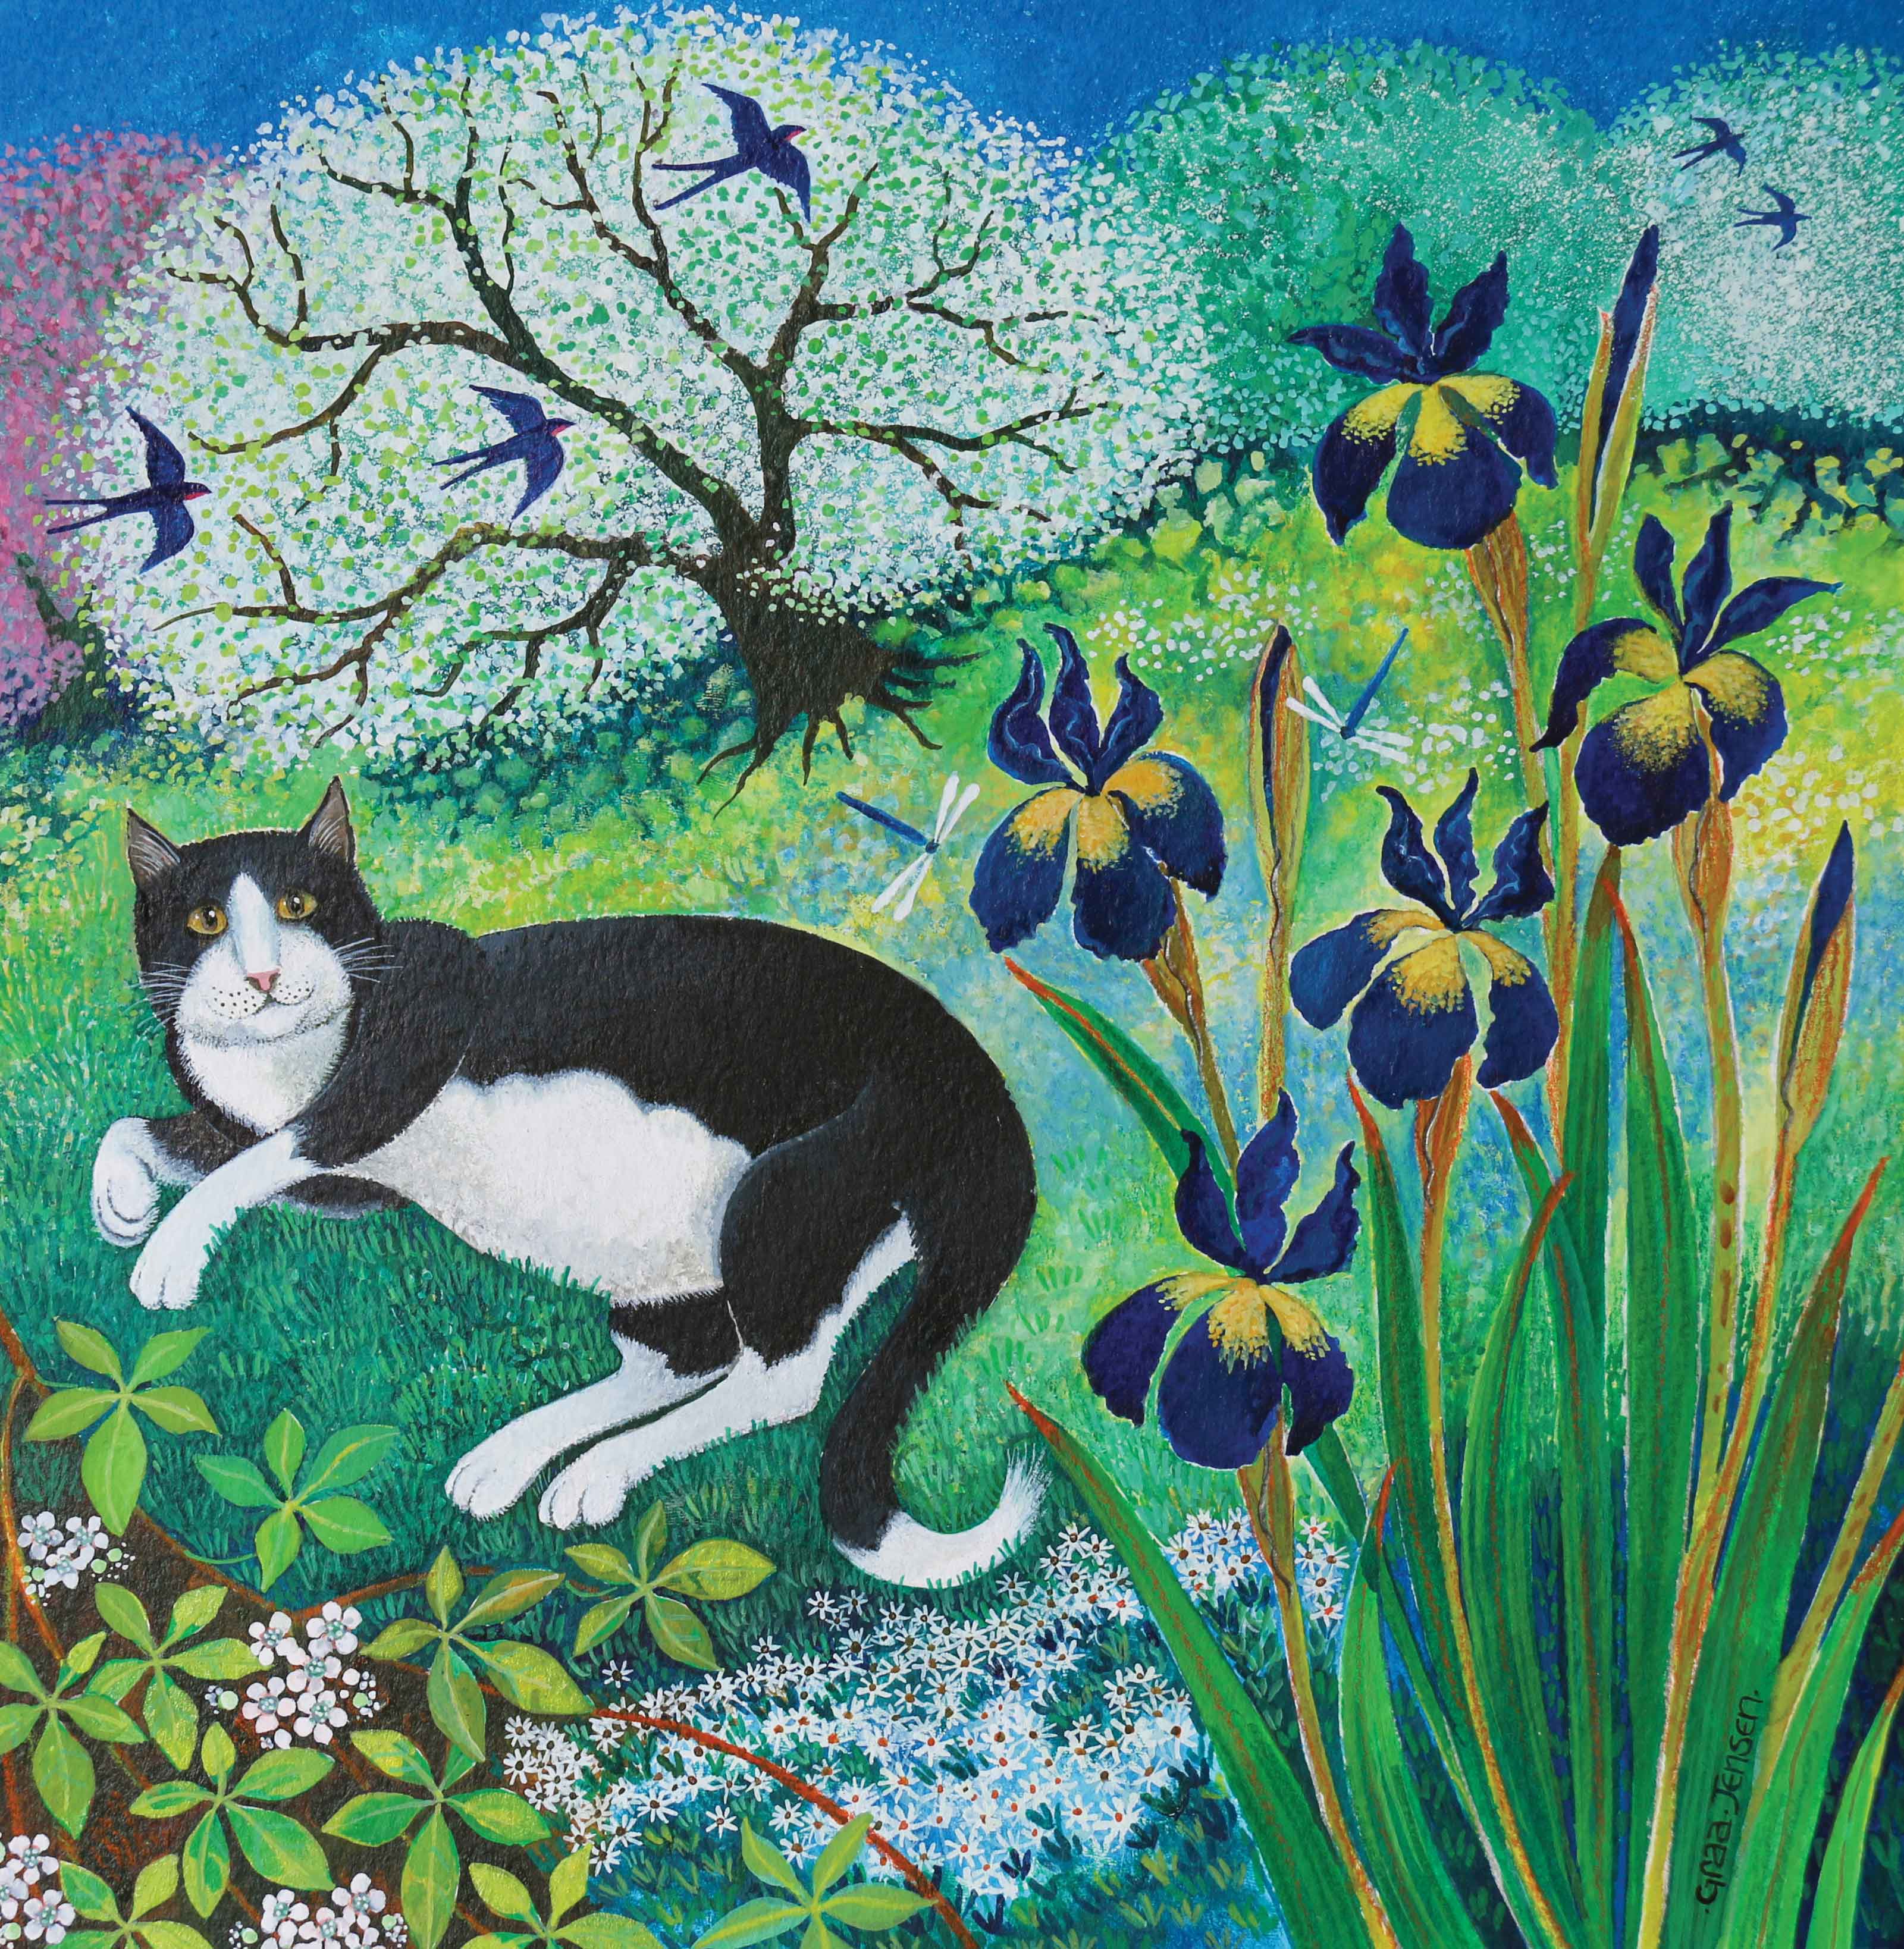 Kit's Garden by Lisa Graa Jensen, Fine Art Greeting Card, Acrylic Inks, Cat in the garden with swallows and irises